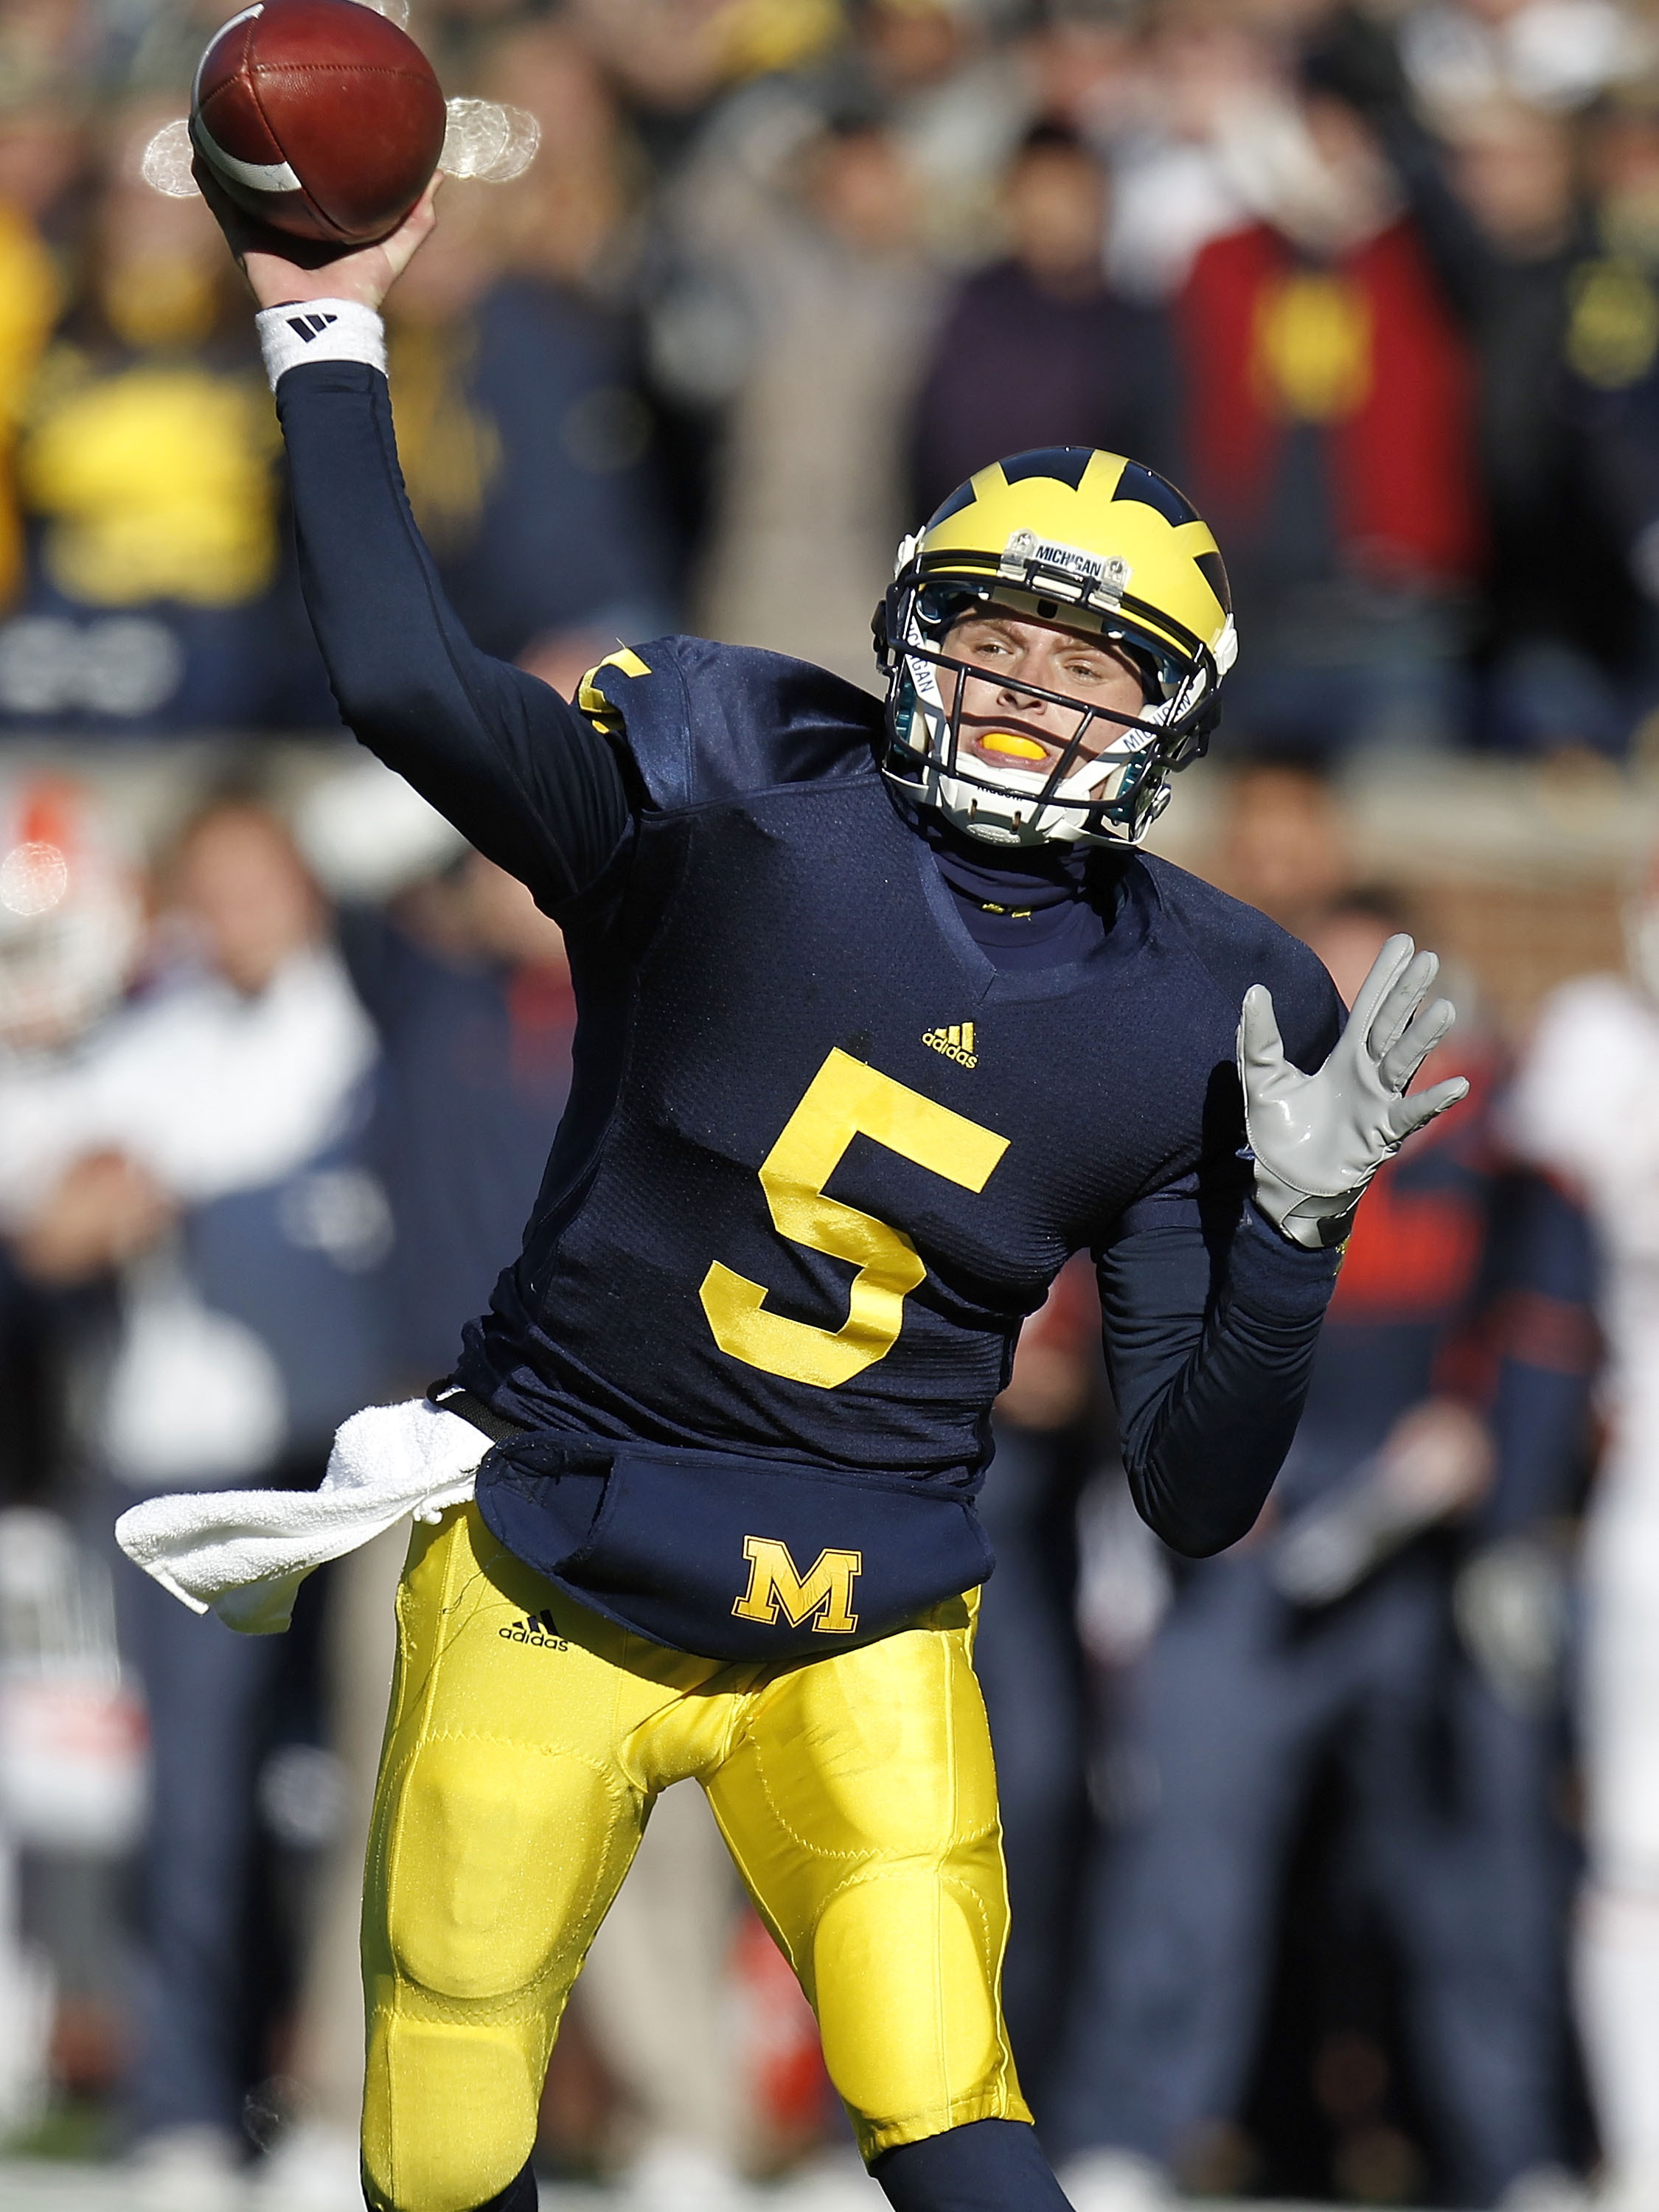 ANN ARBOR, MI - NOVEMBER 06:  Tate Forcier #5 of the Michigan Wolverines throws a fourth quarter pass while playing the Illinios Fighting Illini at Michigan Stadium on November 6, 2010 in Ann Arbor, Michigan. Michigan won the game 67-65. (Photo by Gregory